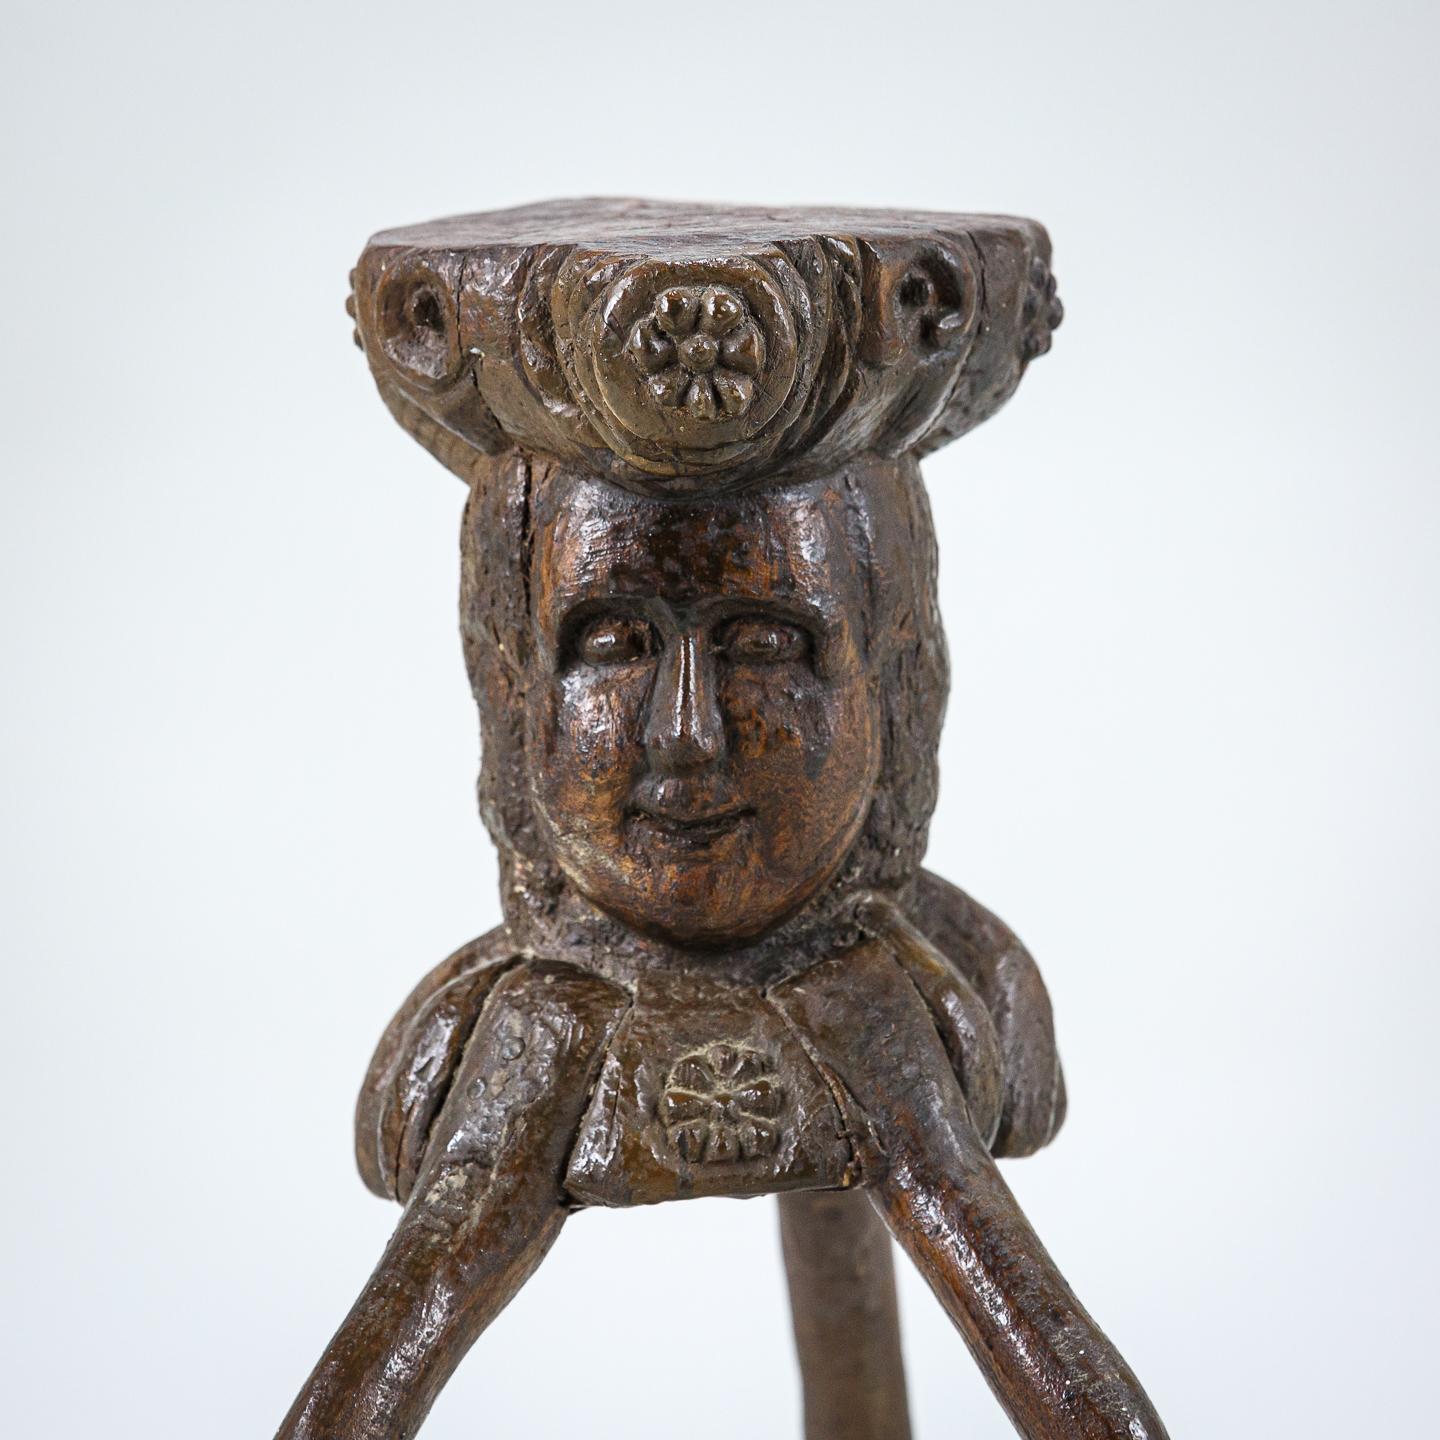 Impressive, small early 19th Century anthropomorphic cutting block believed to be a lacemakers station highly unusual rare carved head as the main body of the block with three sculptural legs. Crusty historical treacle painted finish. France Circa